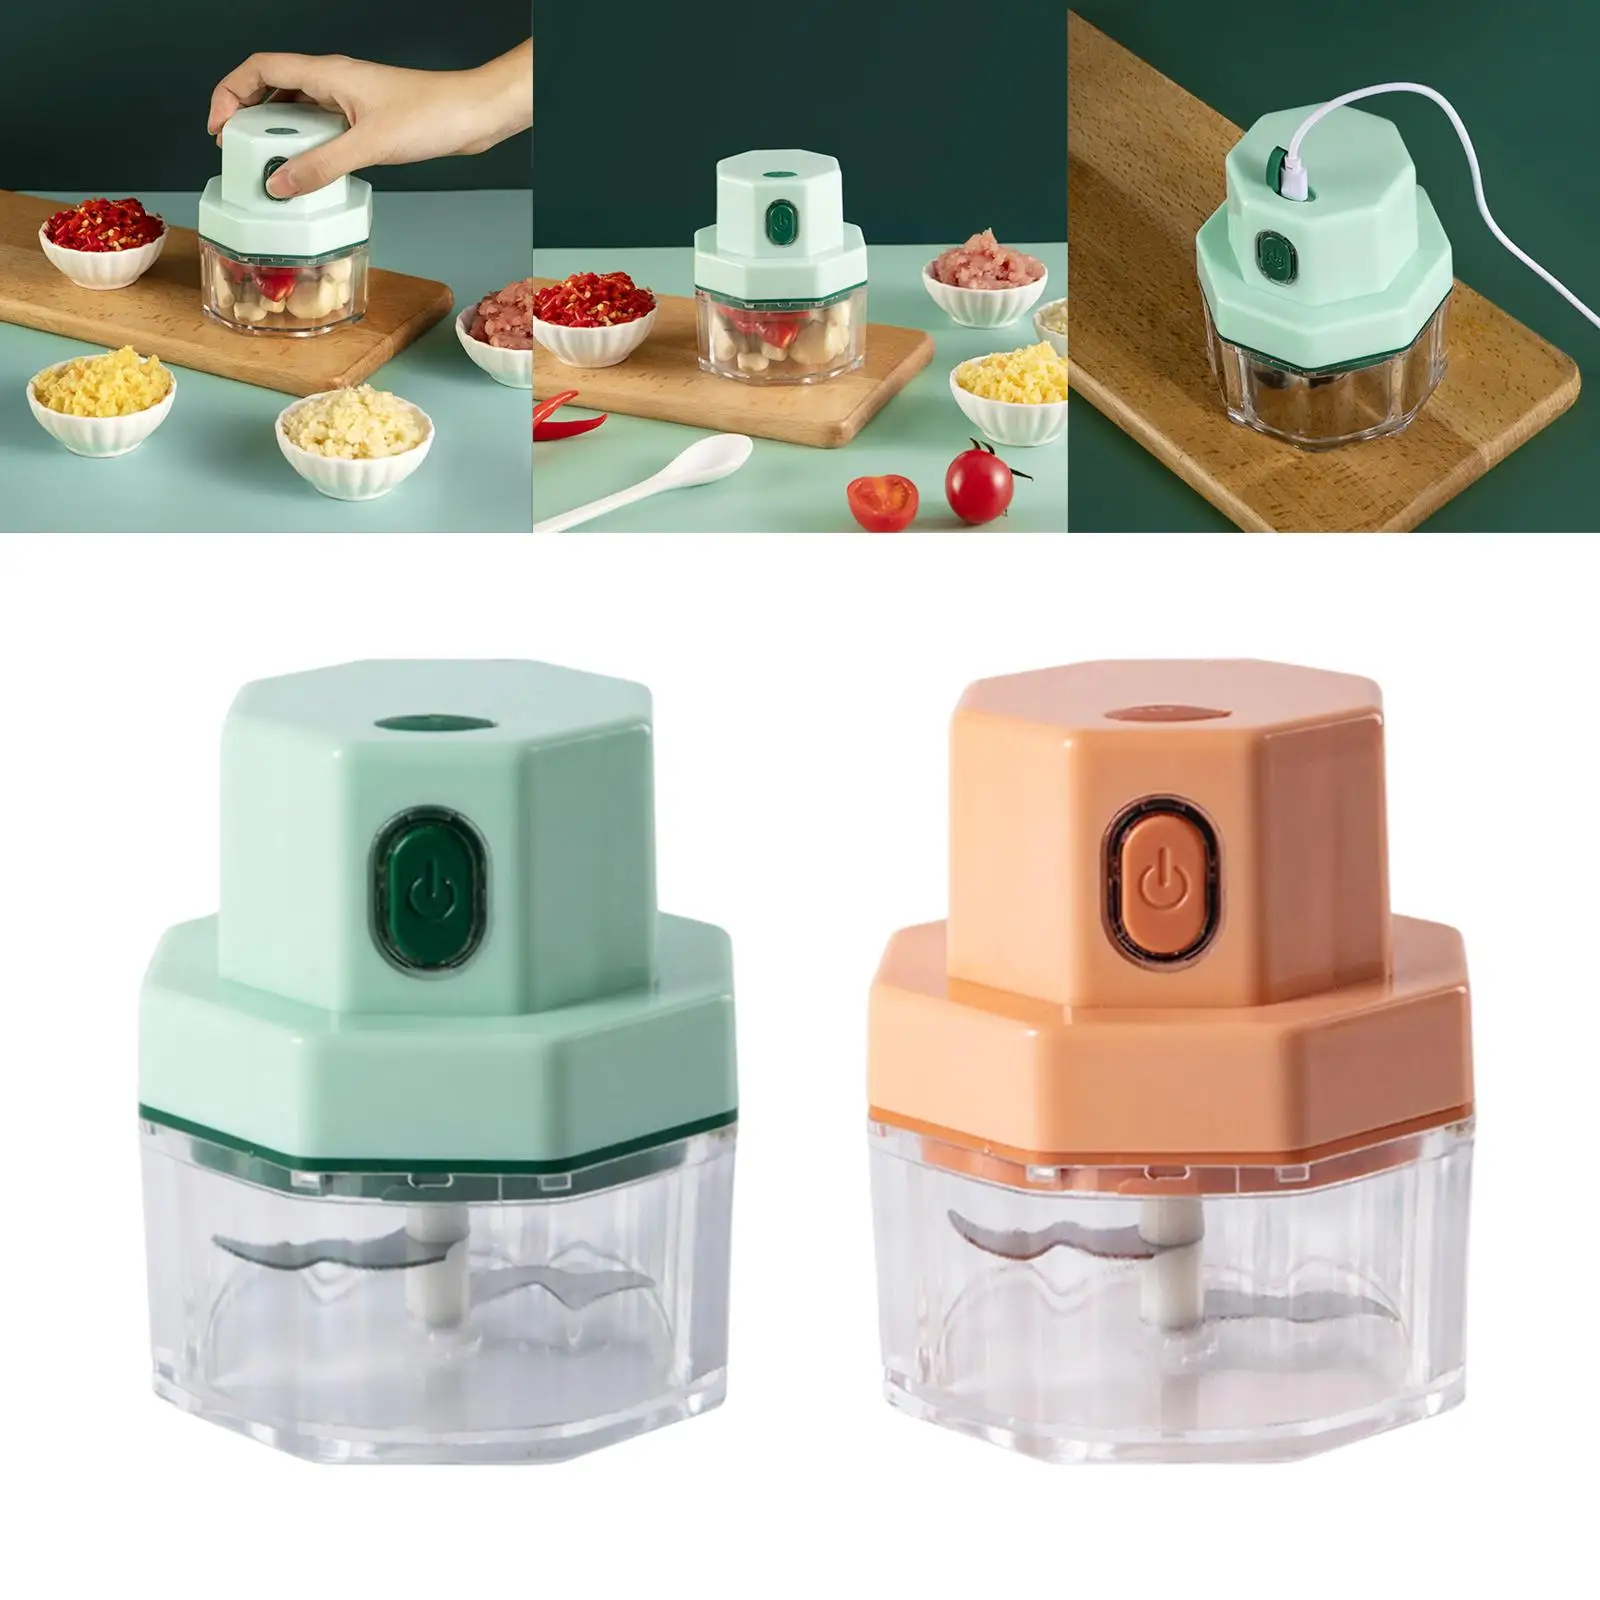 Multifunction Electric Garlic Chopper Food Processor USB Charging Compact Mincer Cutter Masher for Meat Peanut Baby Food Chili